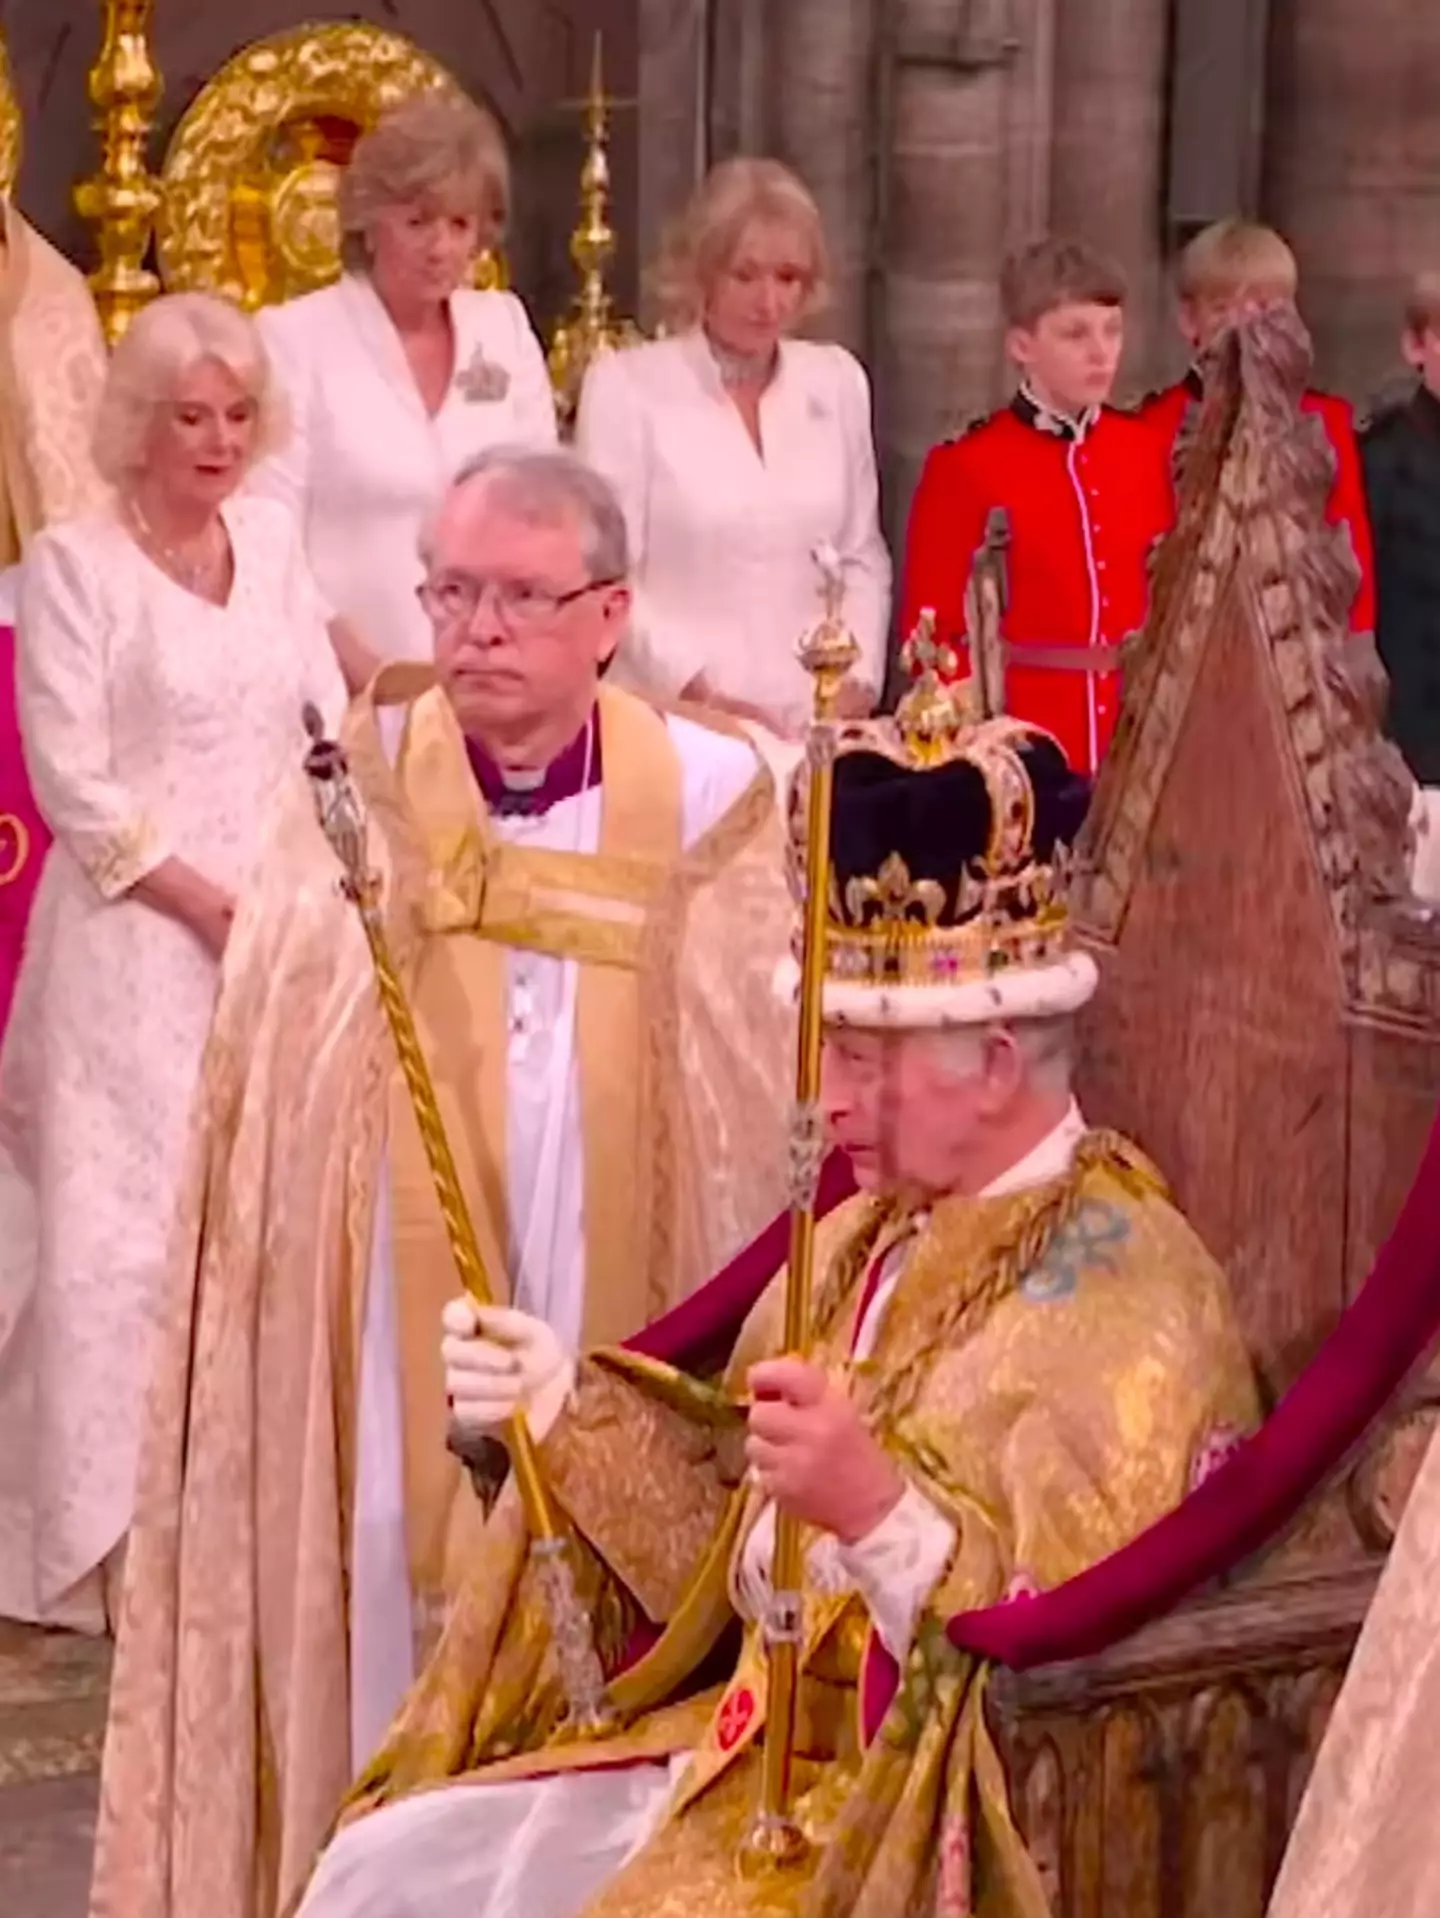 Prince Harry and William watched their father receive the crown.